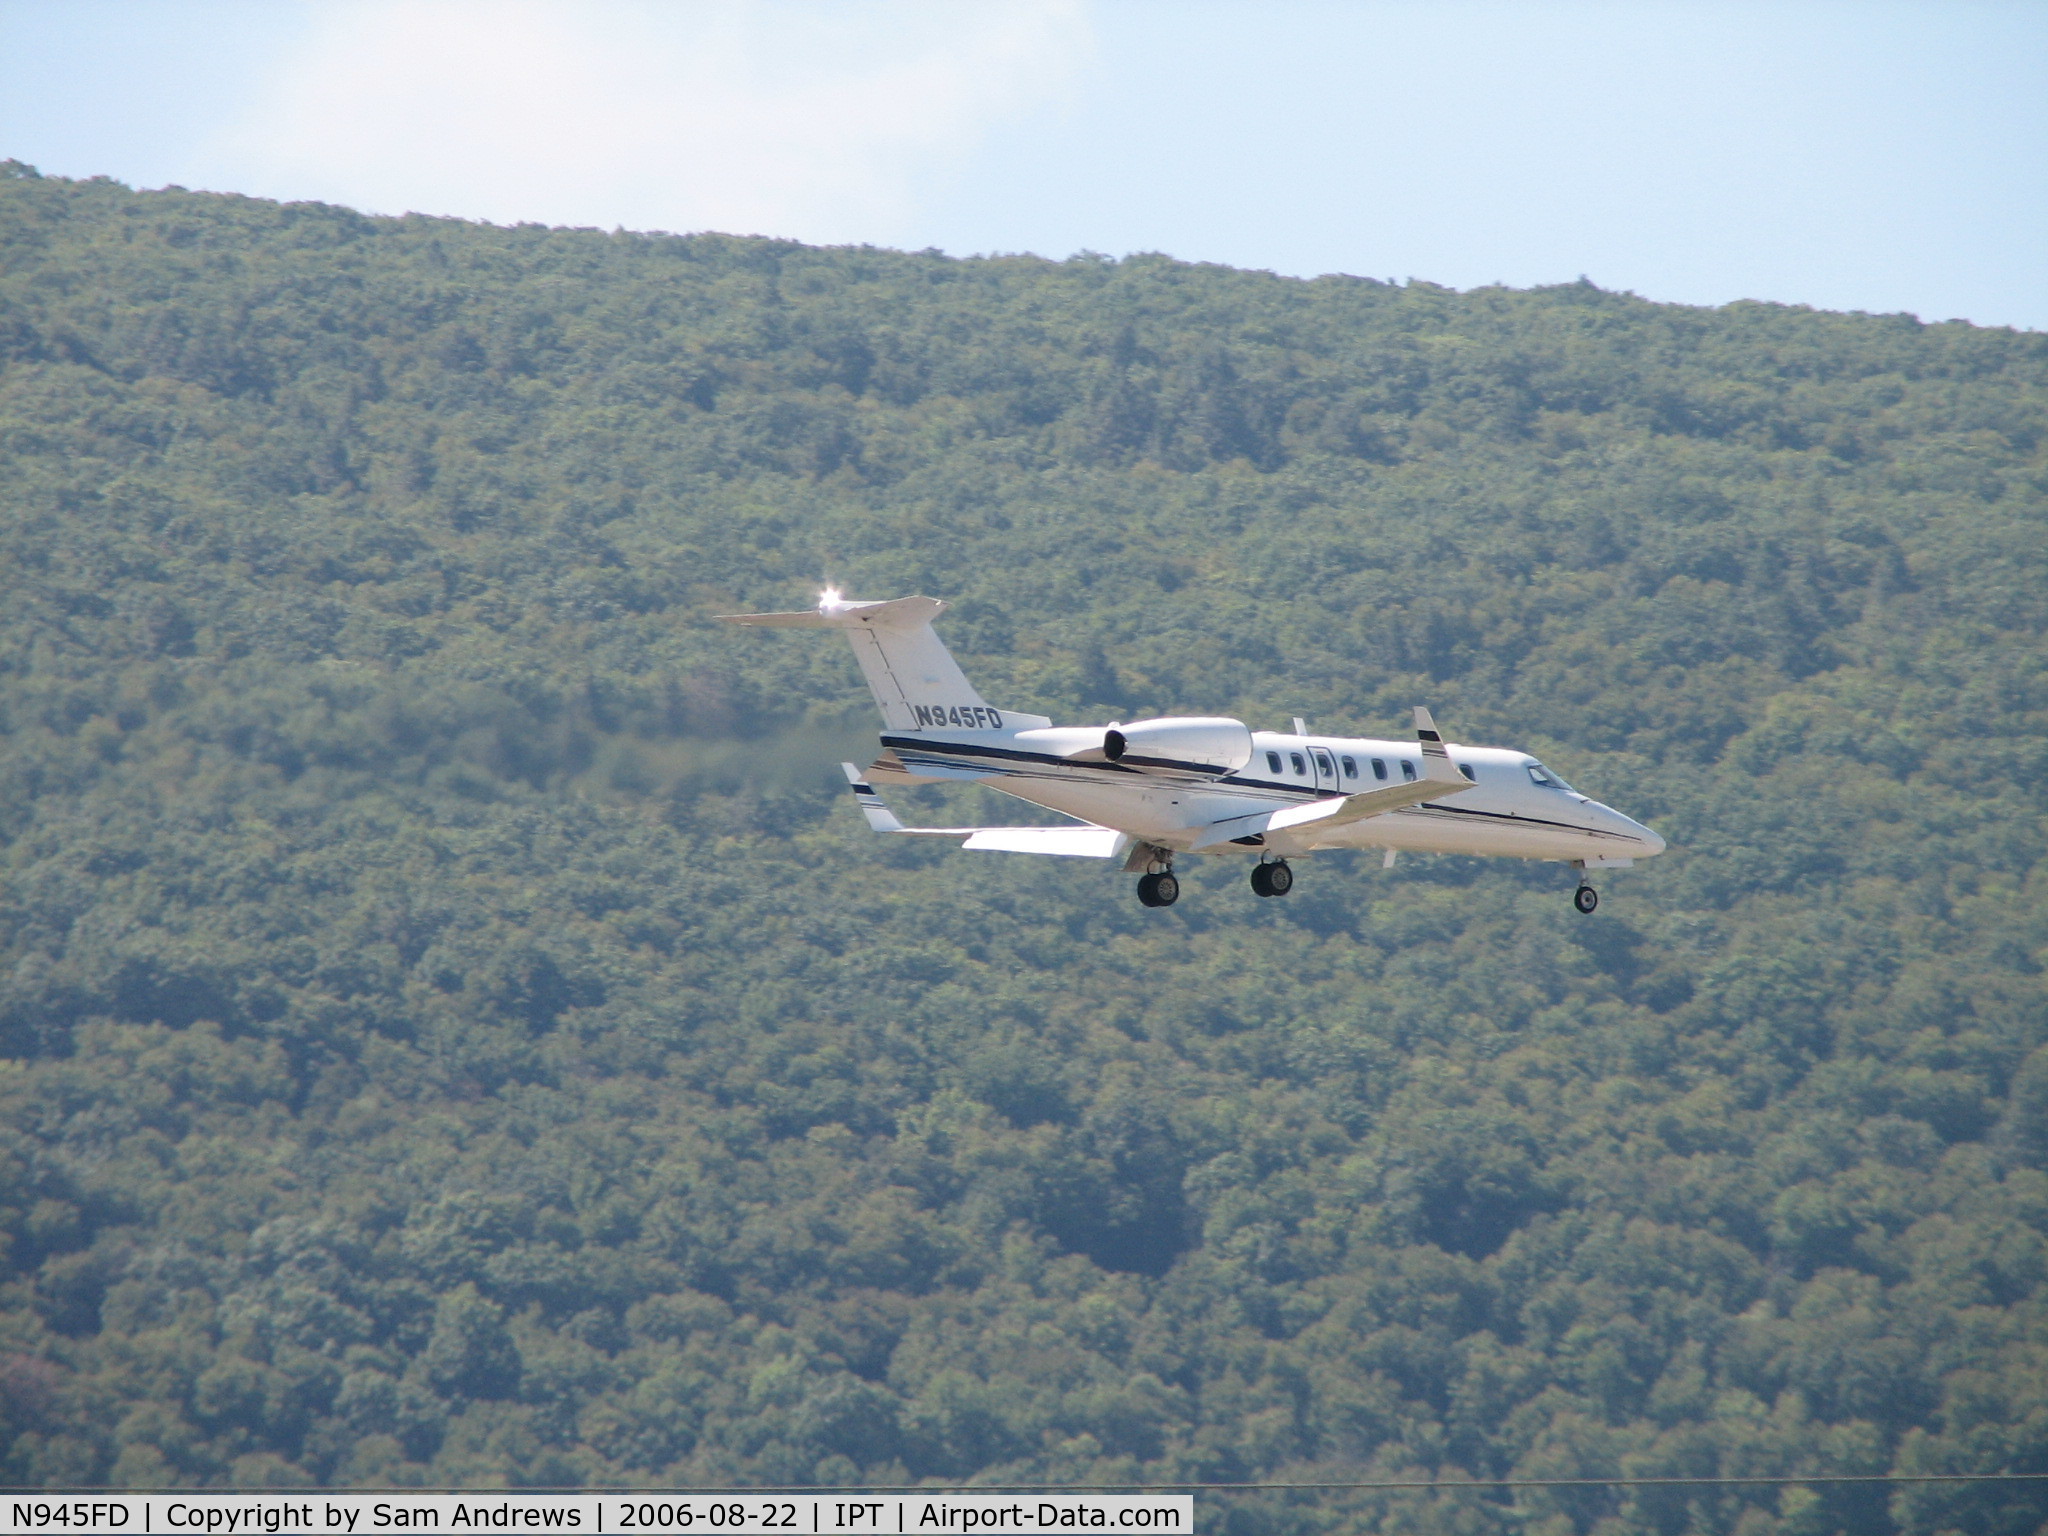 N945FD, 2000 Learjet 45 C/N 122, stable approaches are always best.